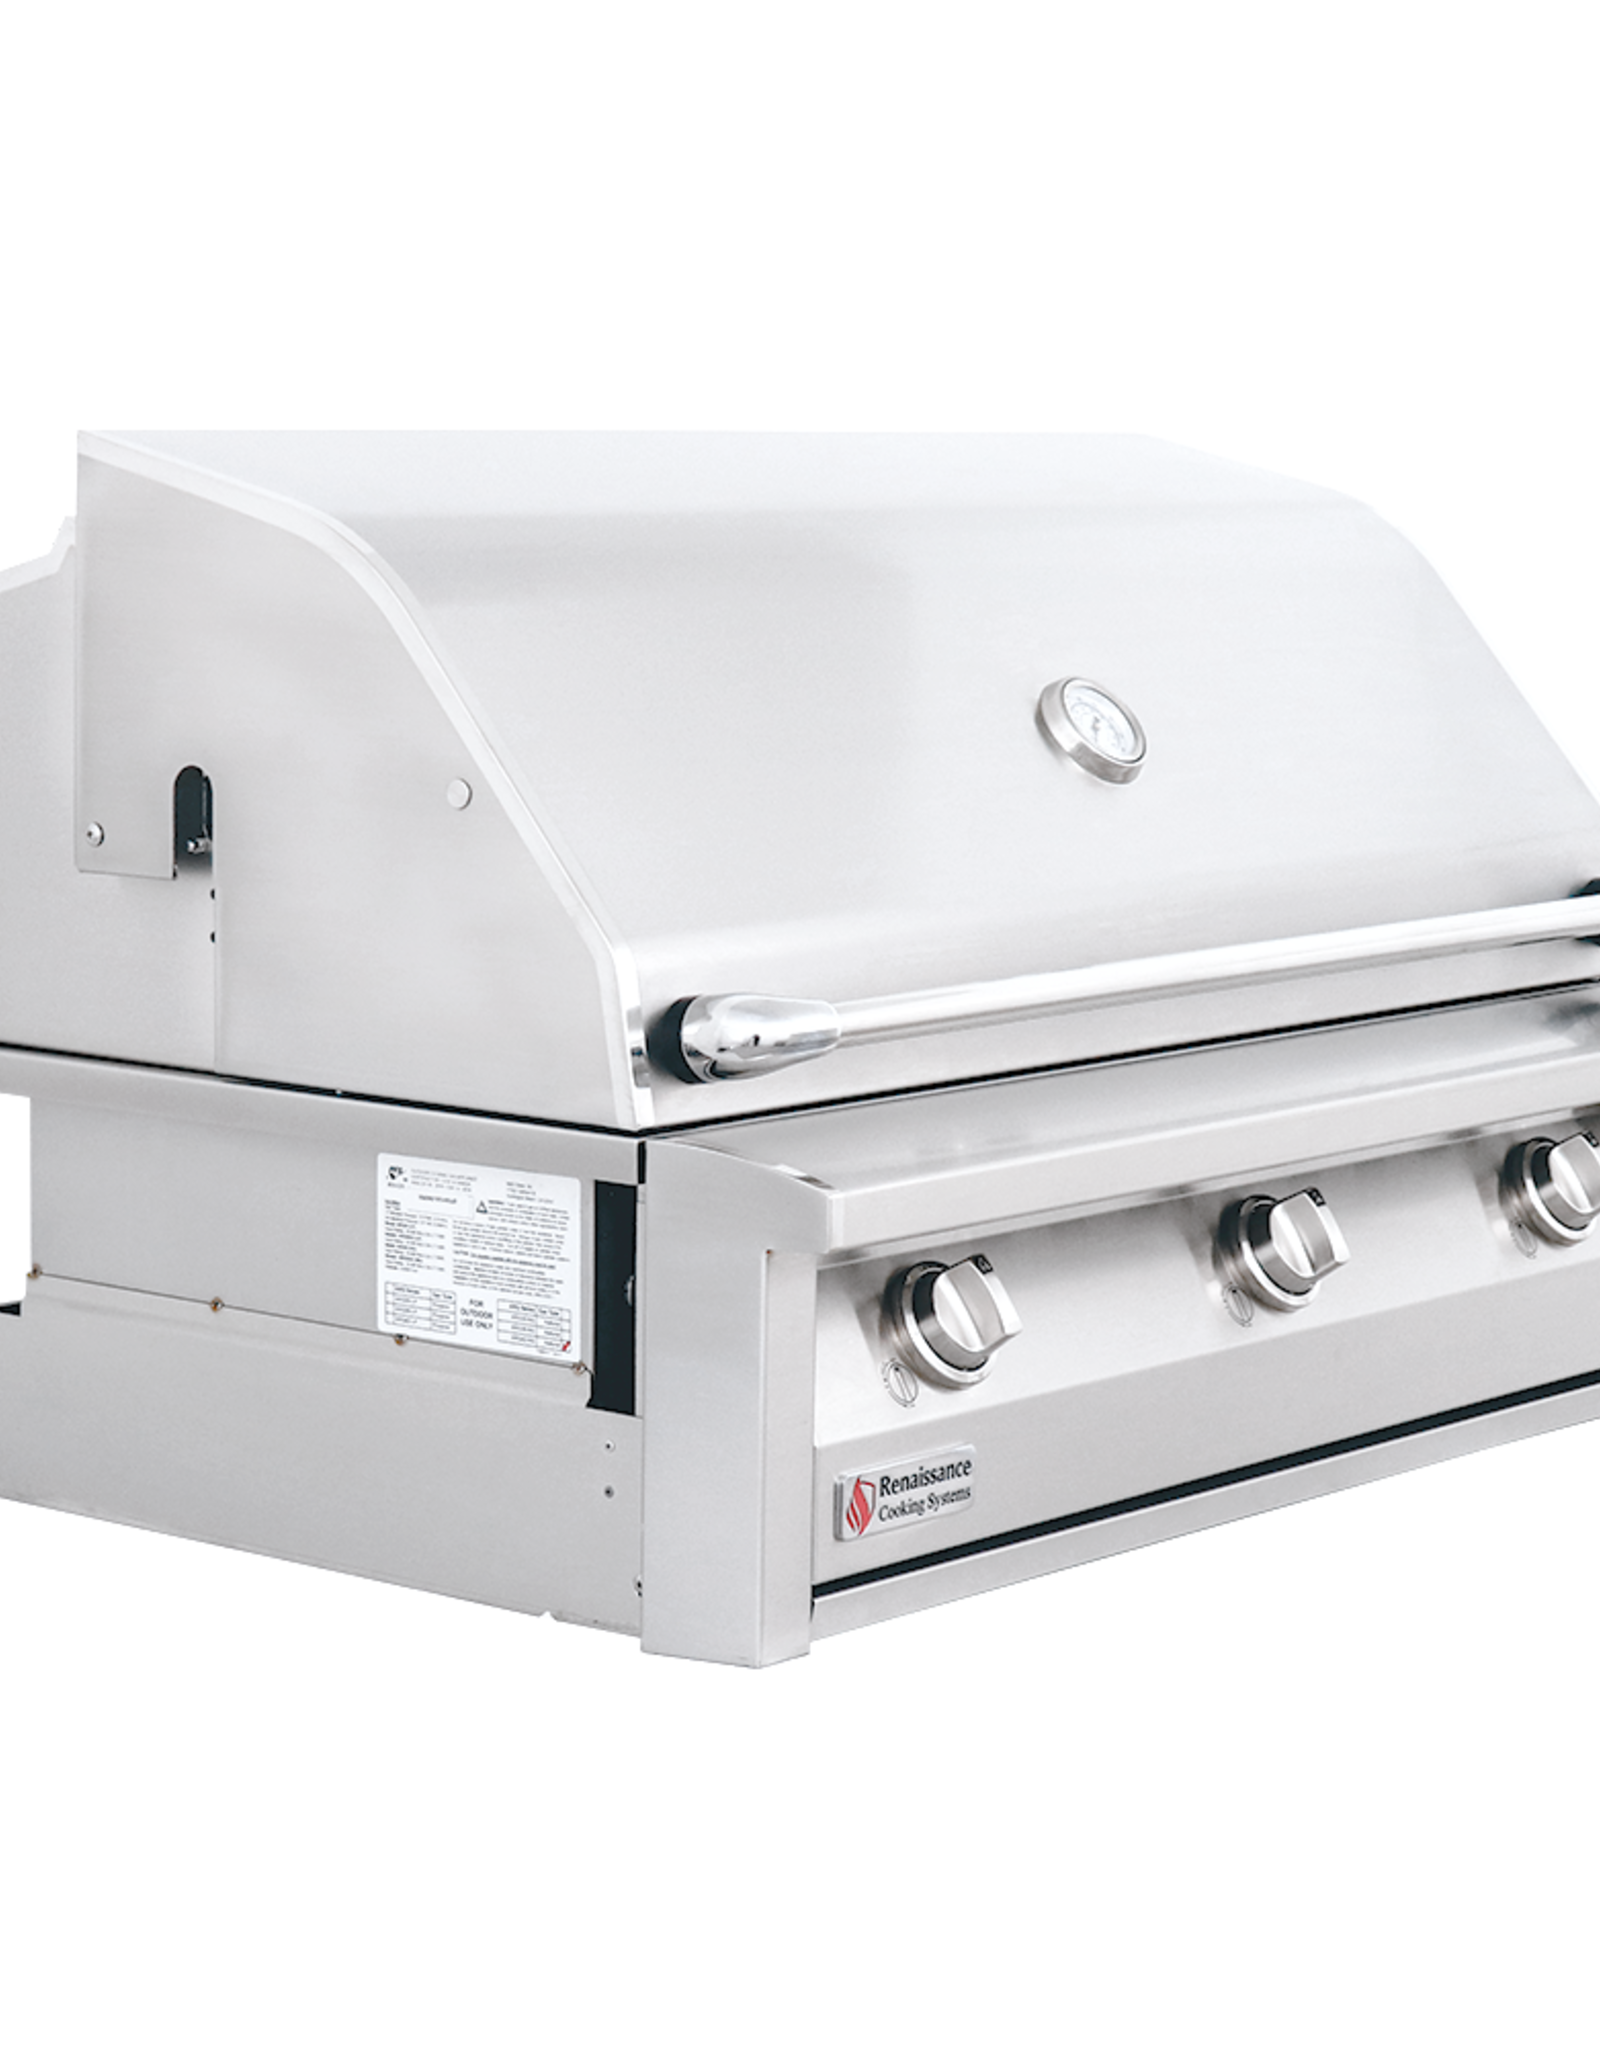 Renaissance Cooking Systems Renaissance Cooking Systems ARG 42" Drop-In Propane Grill - ARG42 LP